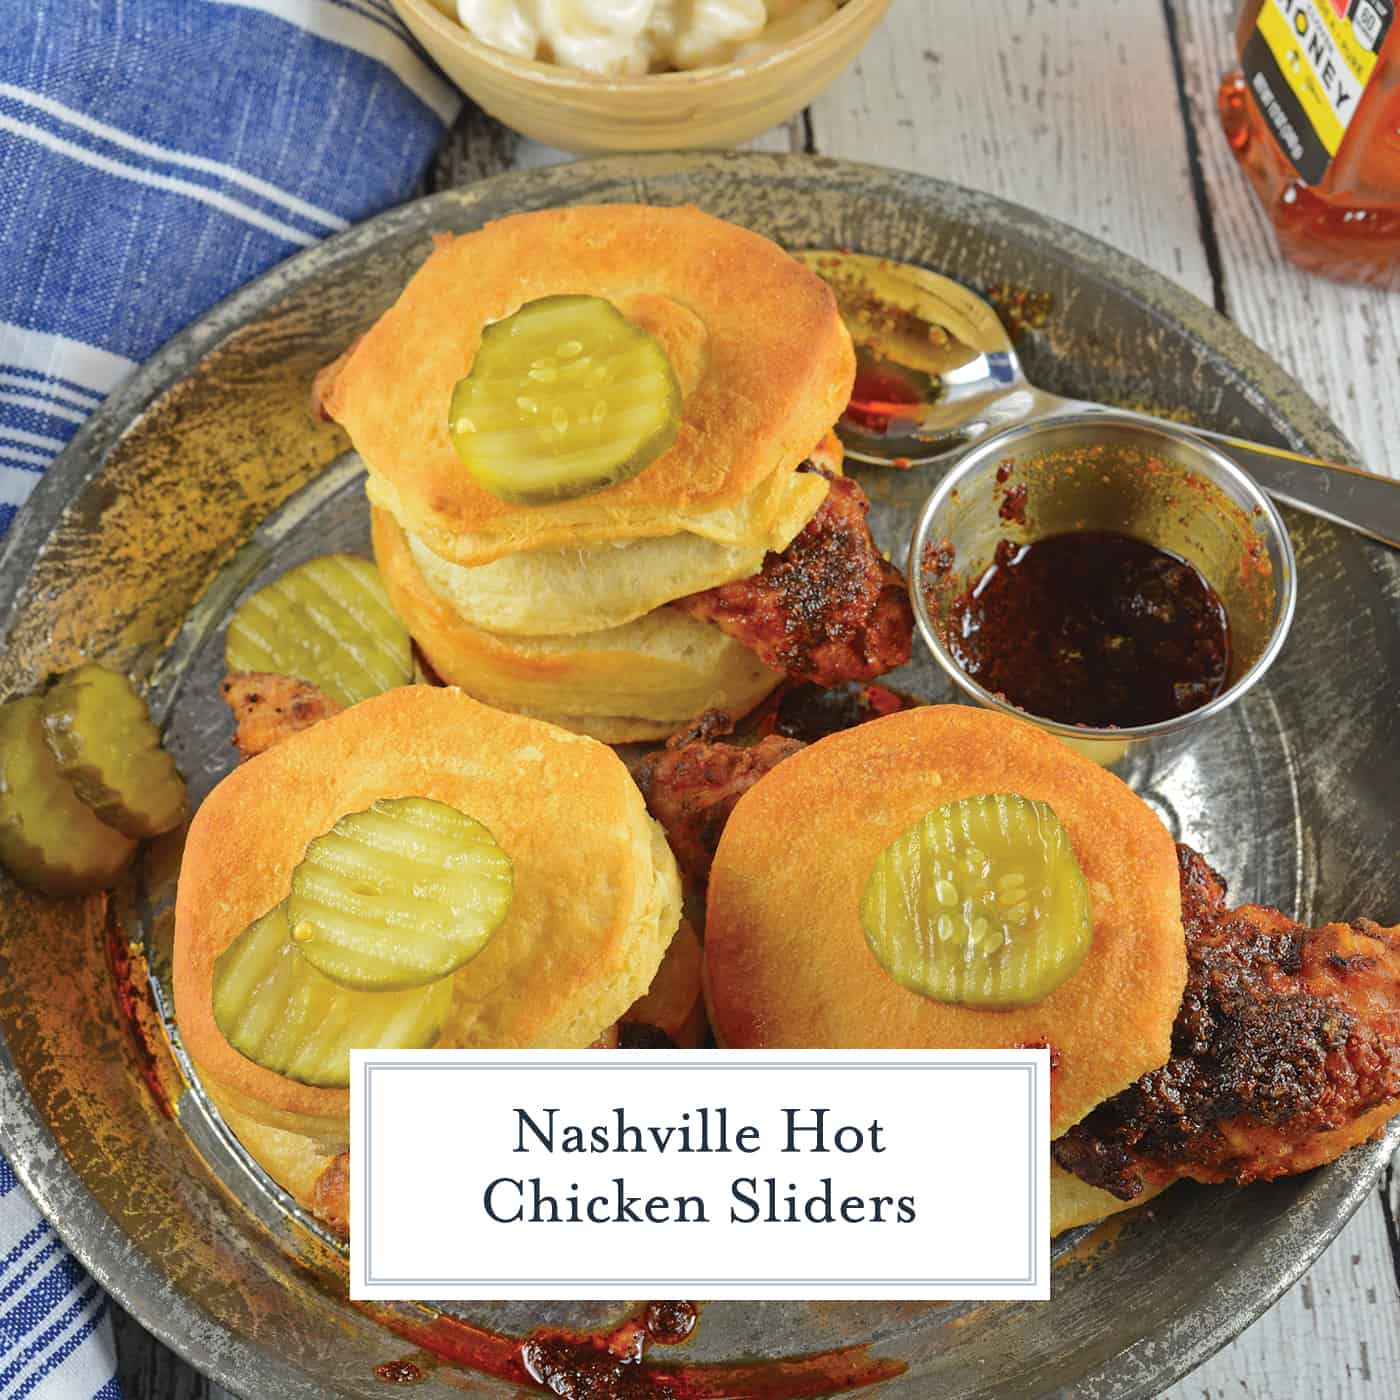 Nashville Hot Chicken Sliders are perfect as a dinner or appetizer. Crispy fried chicken dredged in spicy sauce served on buttermilk biscuits with honey habanero pickles. #nashvillehotchicken #sliderrecipes www.savoryexperiments.com